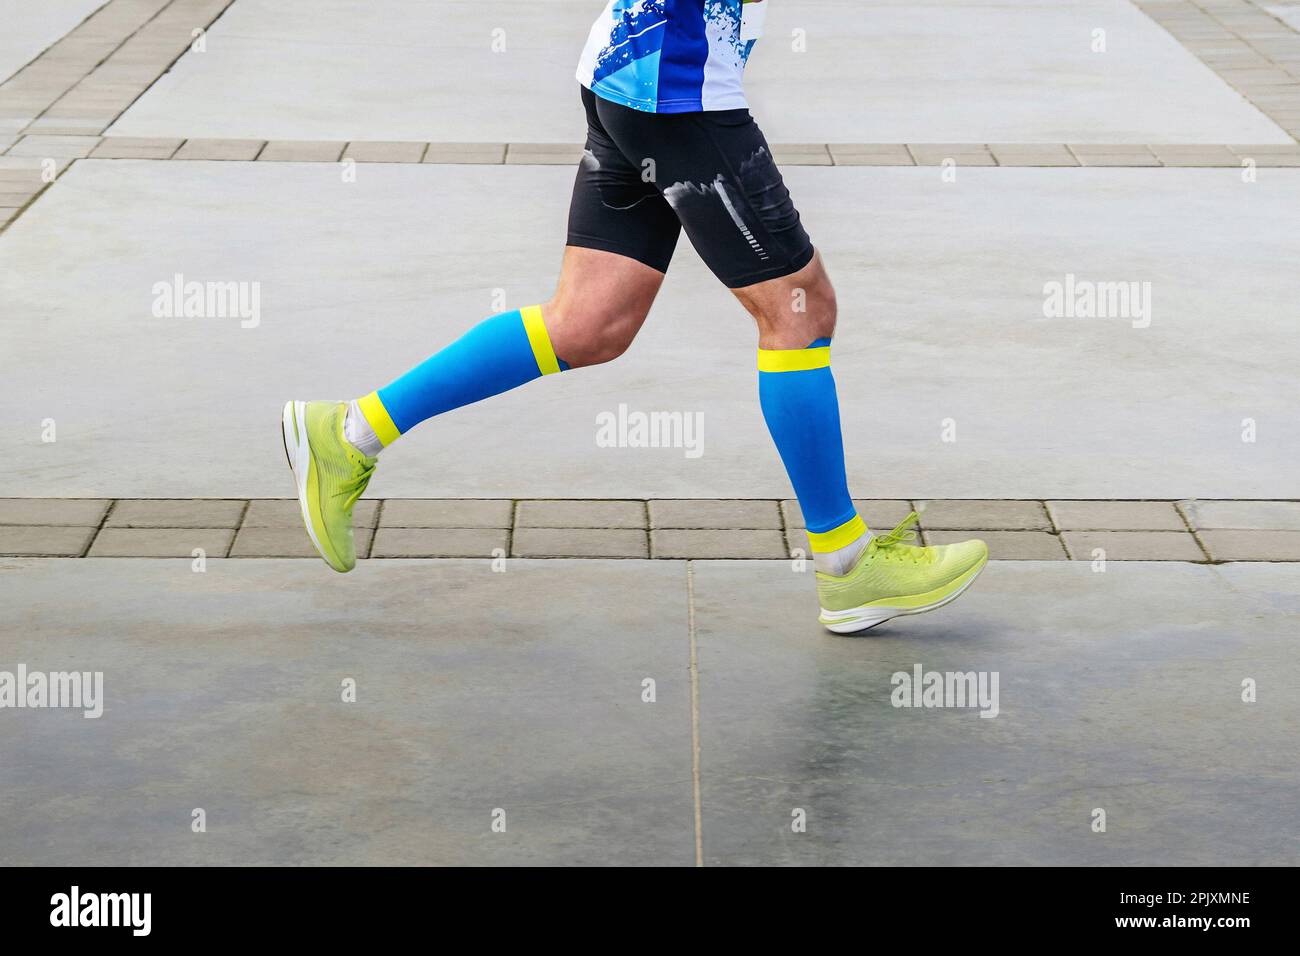 legs athlete runner in compression socks running marathon distance, bright and colorful sportswear Stock Photo